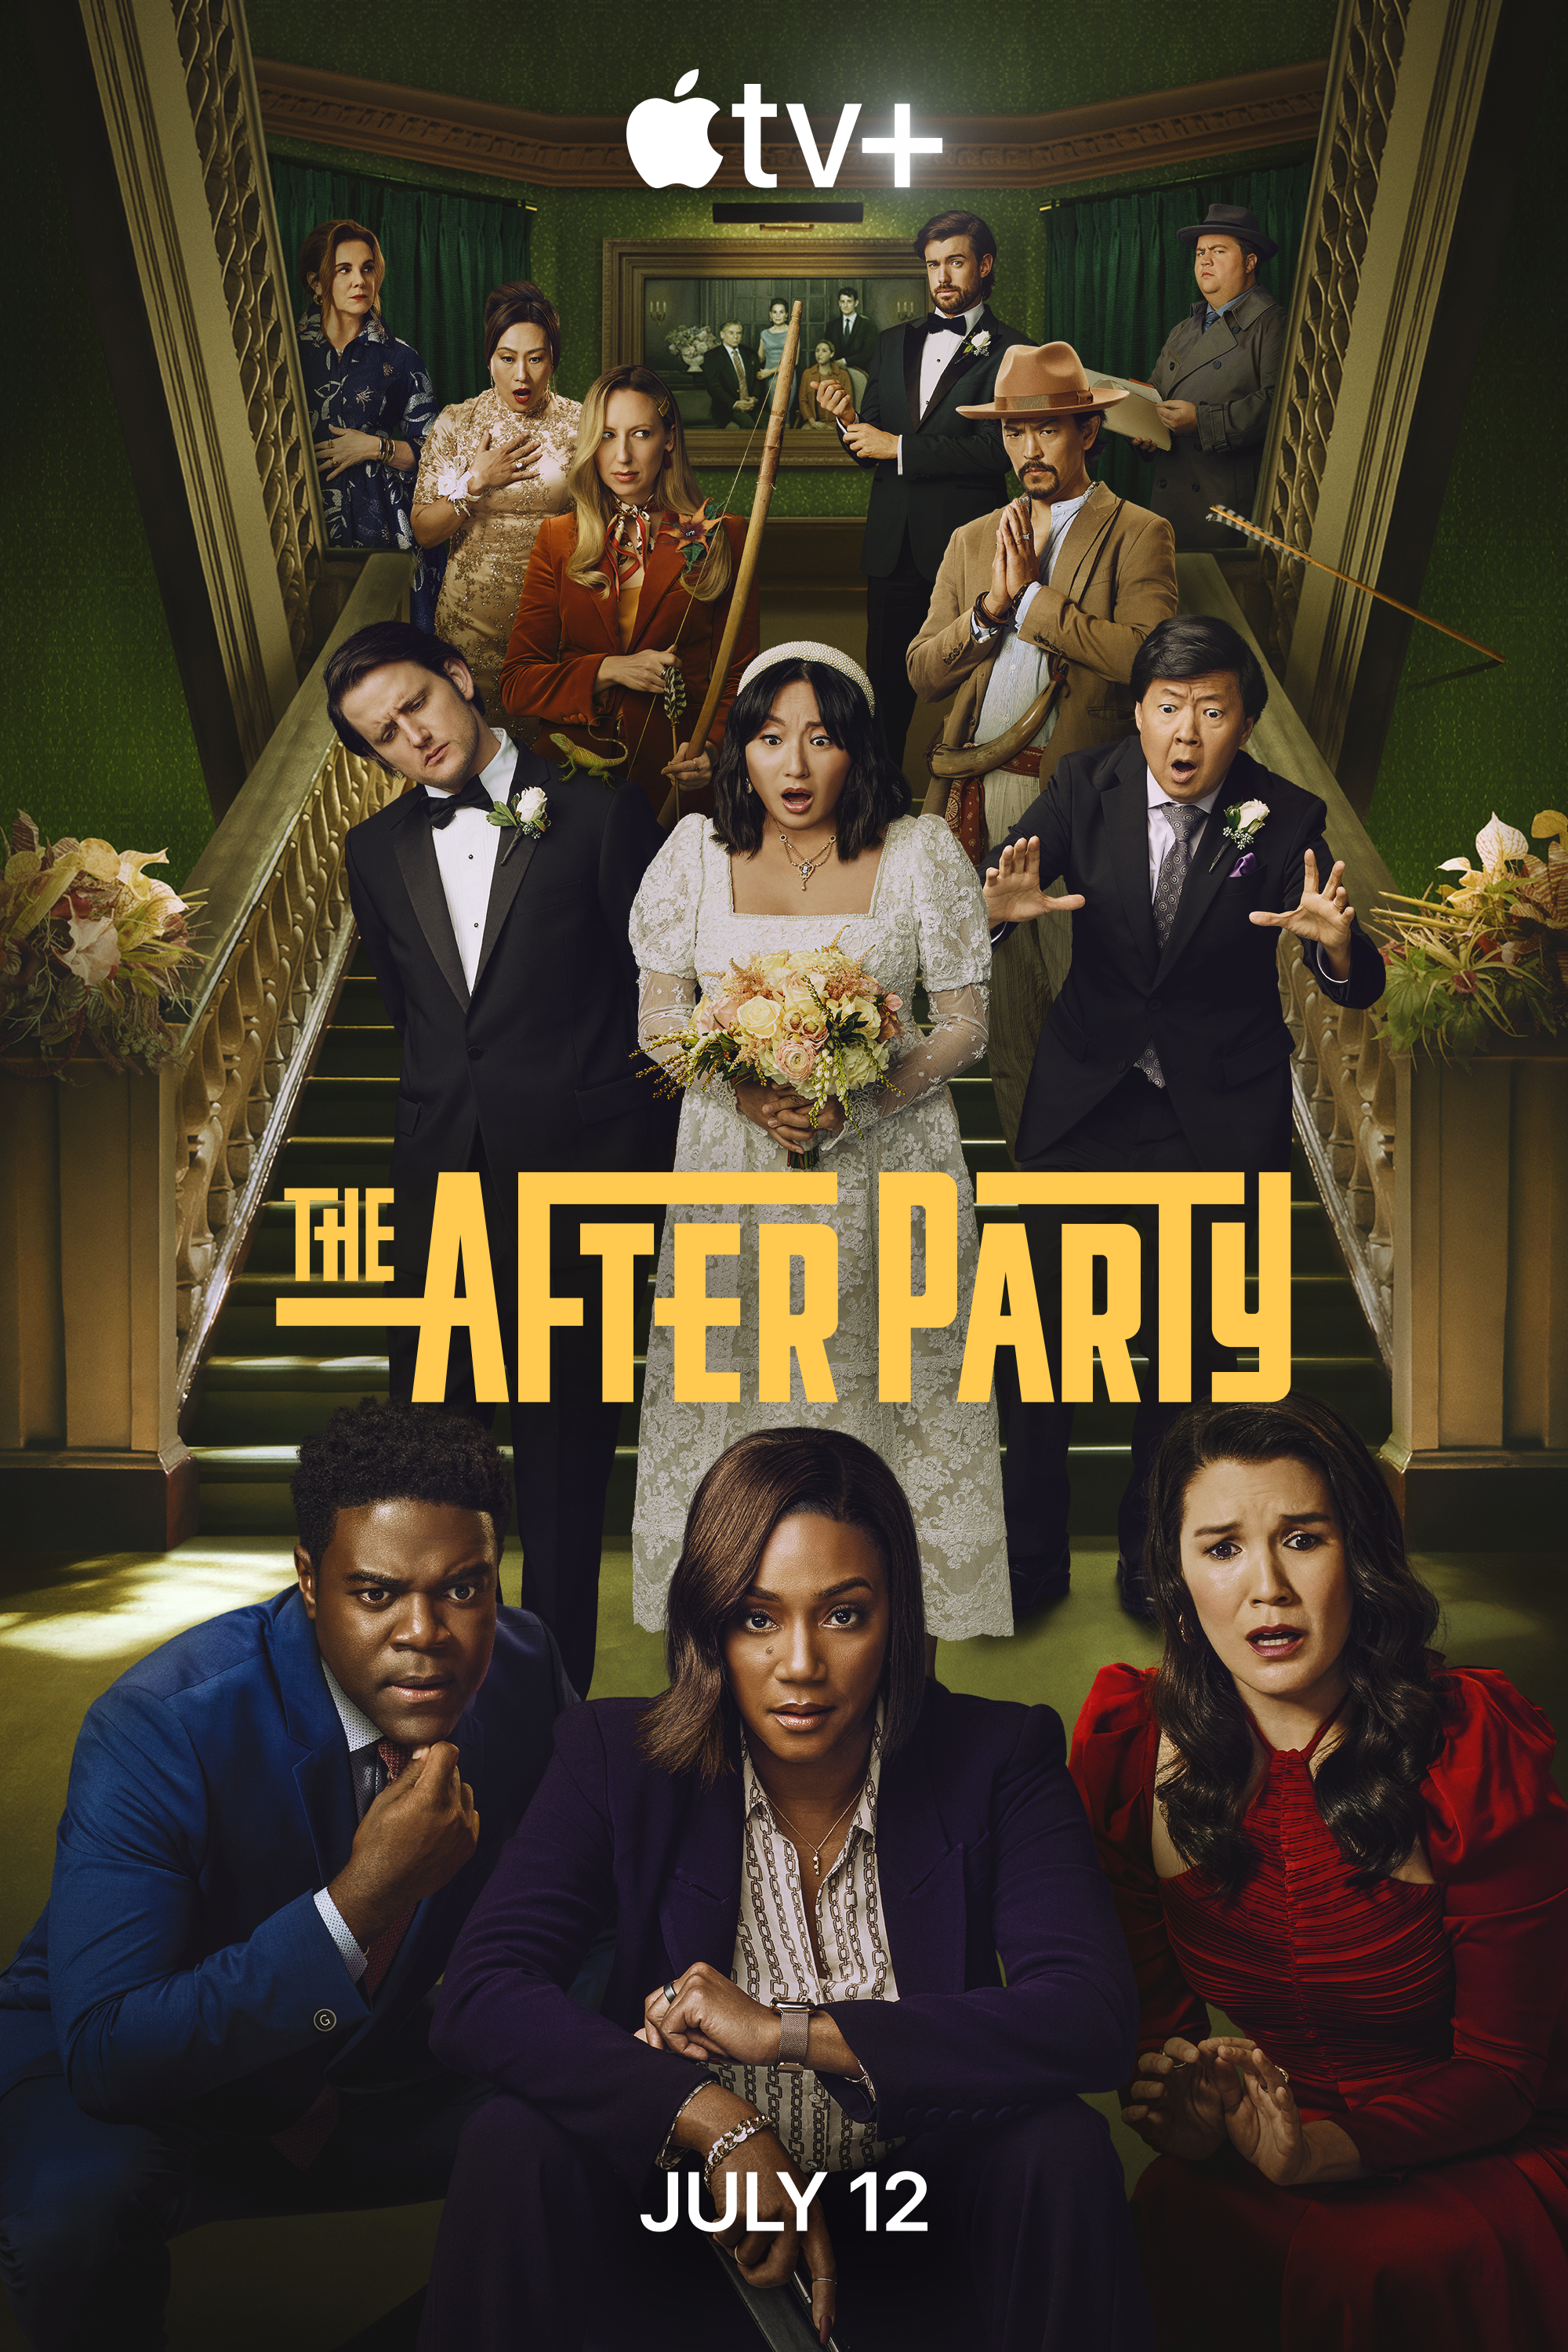 Apple's global hit murder-mystery comedy “The Afterparty” renewed